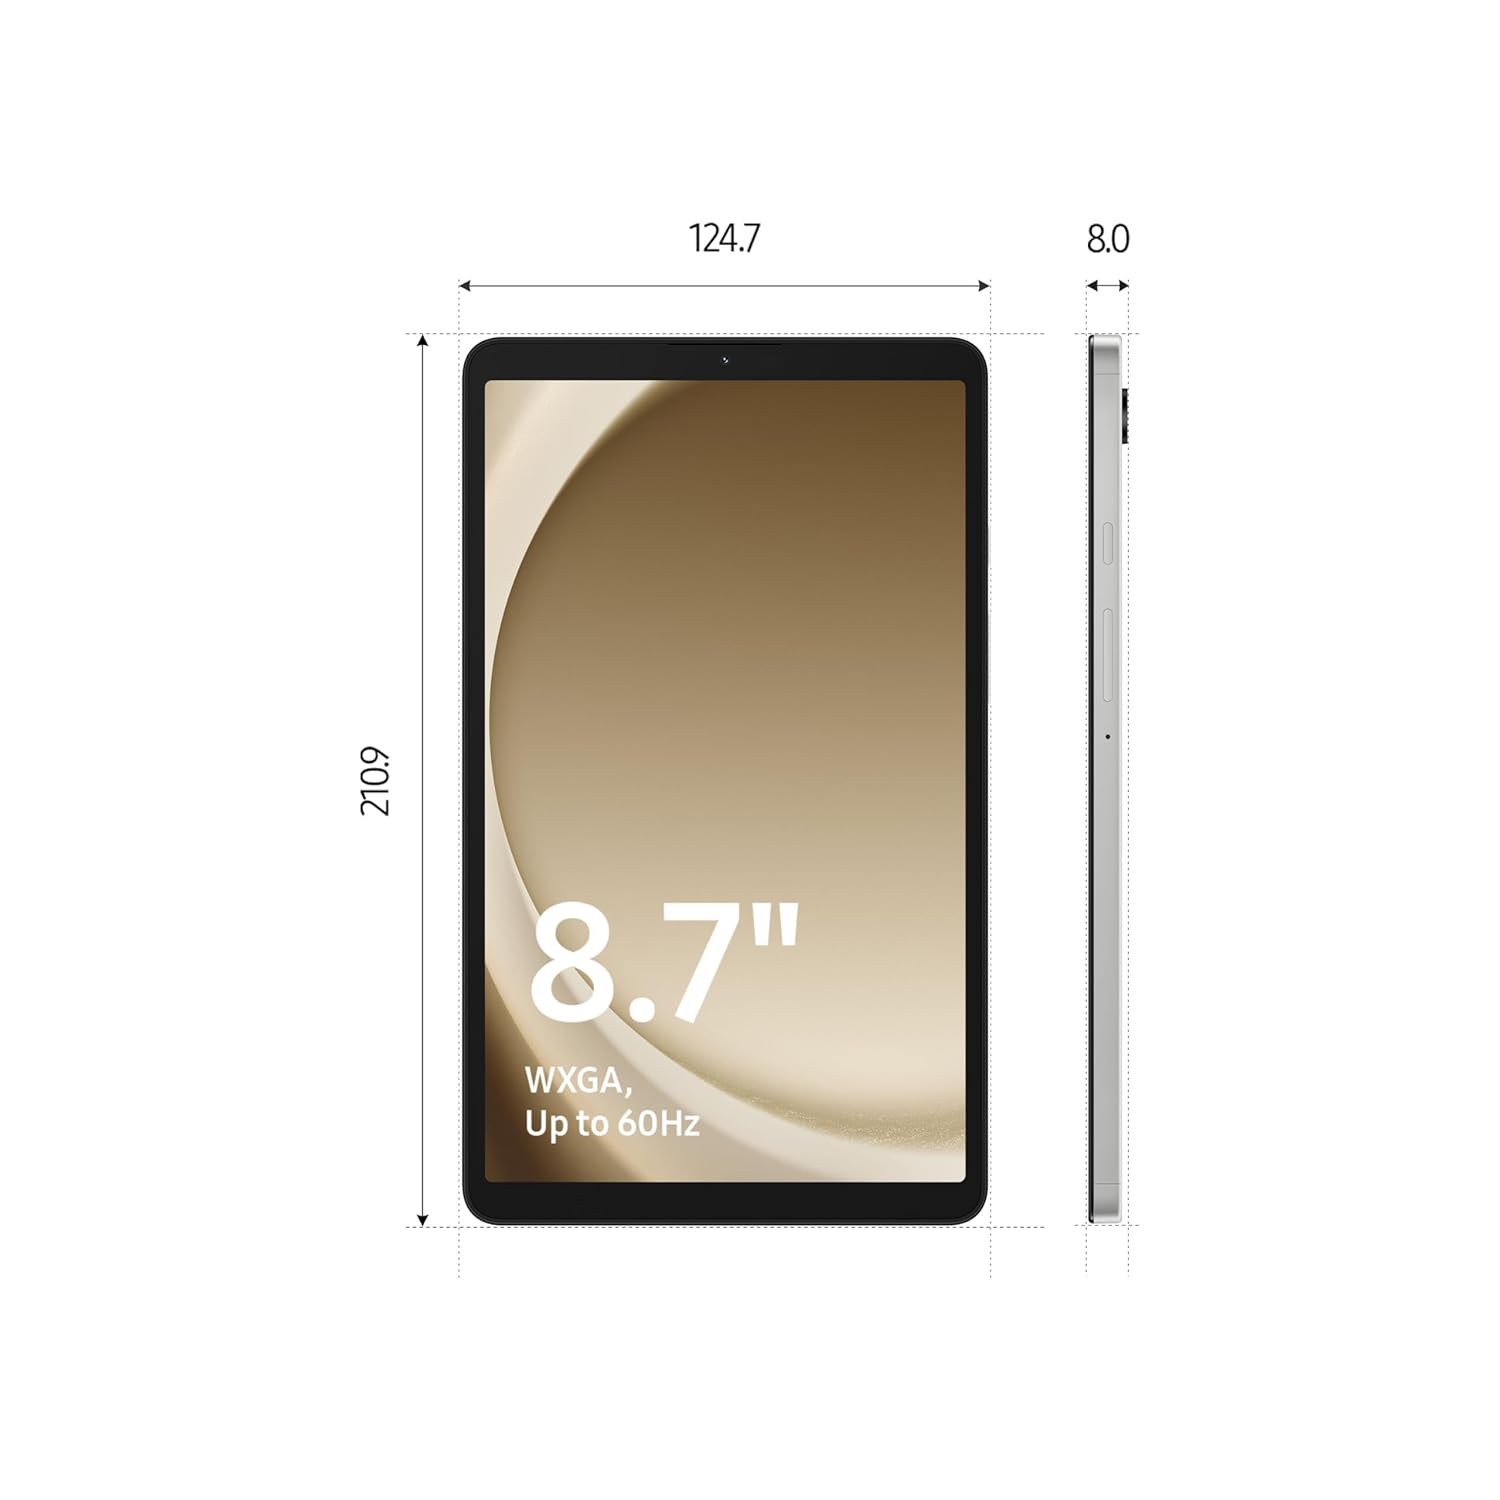 Samsung Galaxy Tab A9 India Launch Confirmed: Wi-Fi-Only, 4G, And